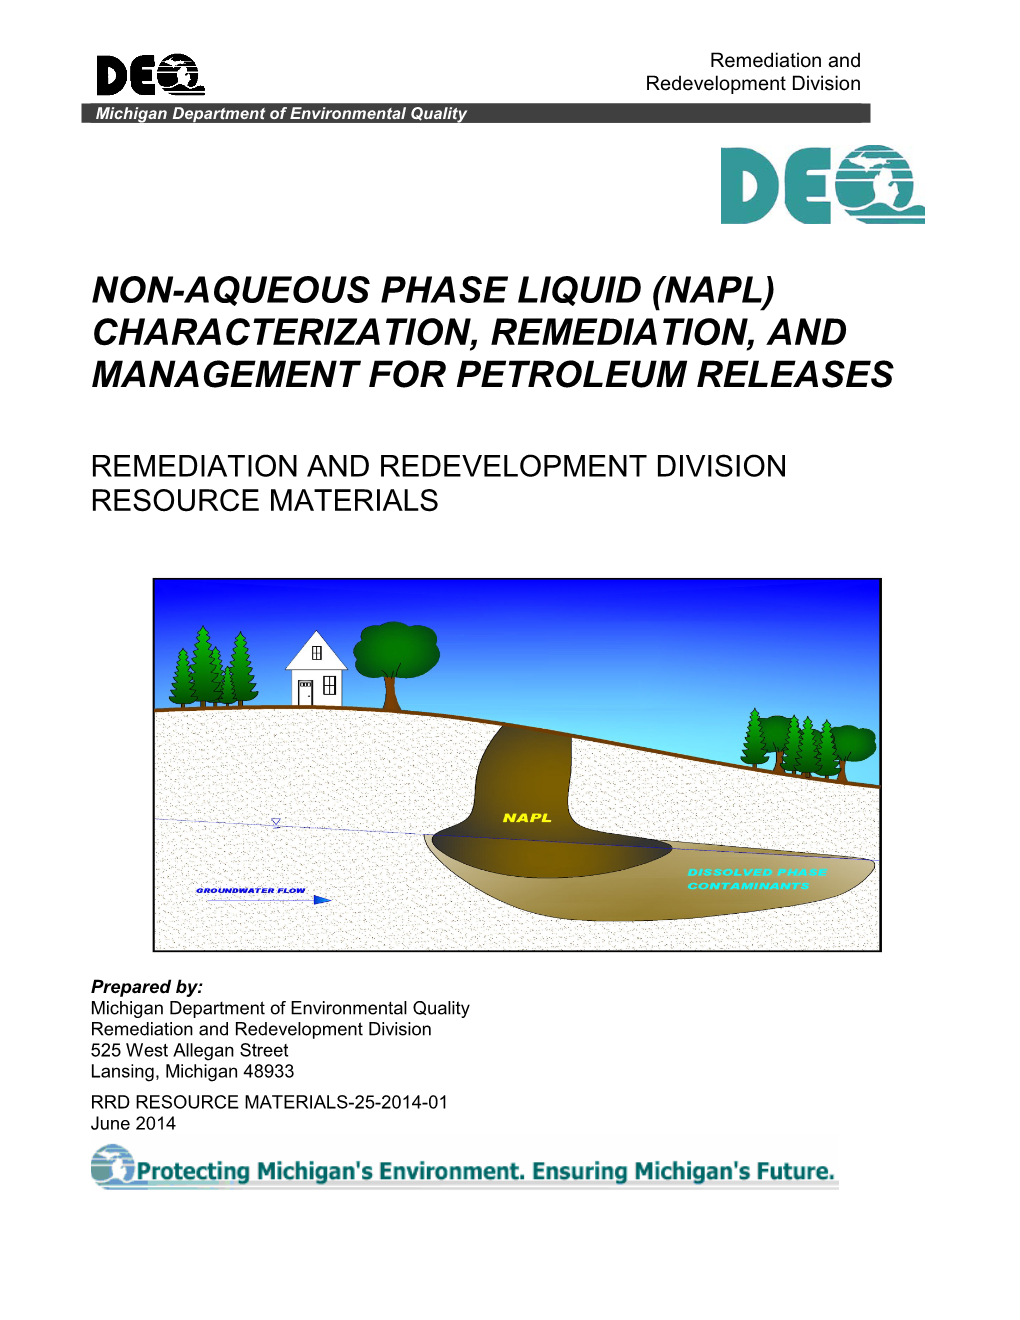 Non-Aqueous Phase Liquid (Napl) Characterization, Remediation, and Management for Petroleum Releases